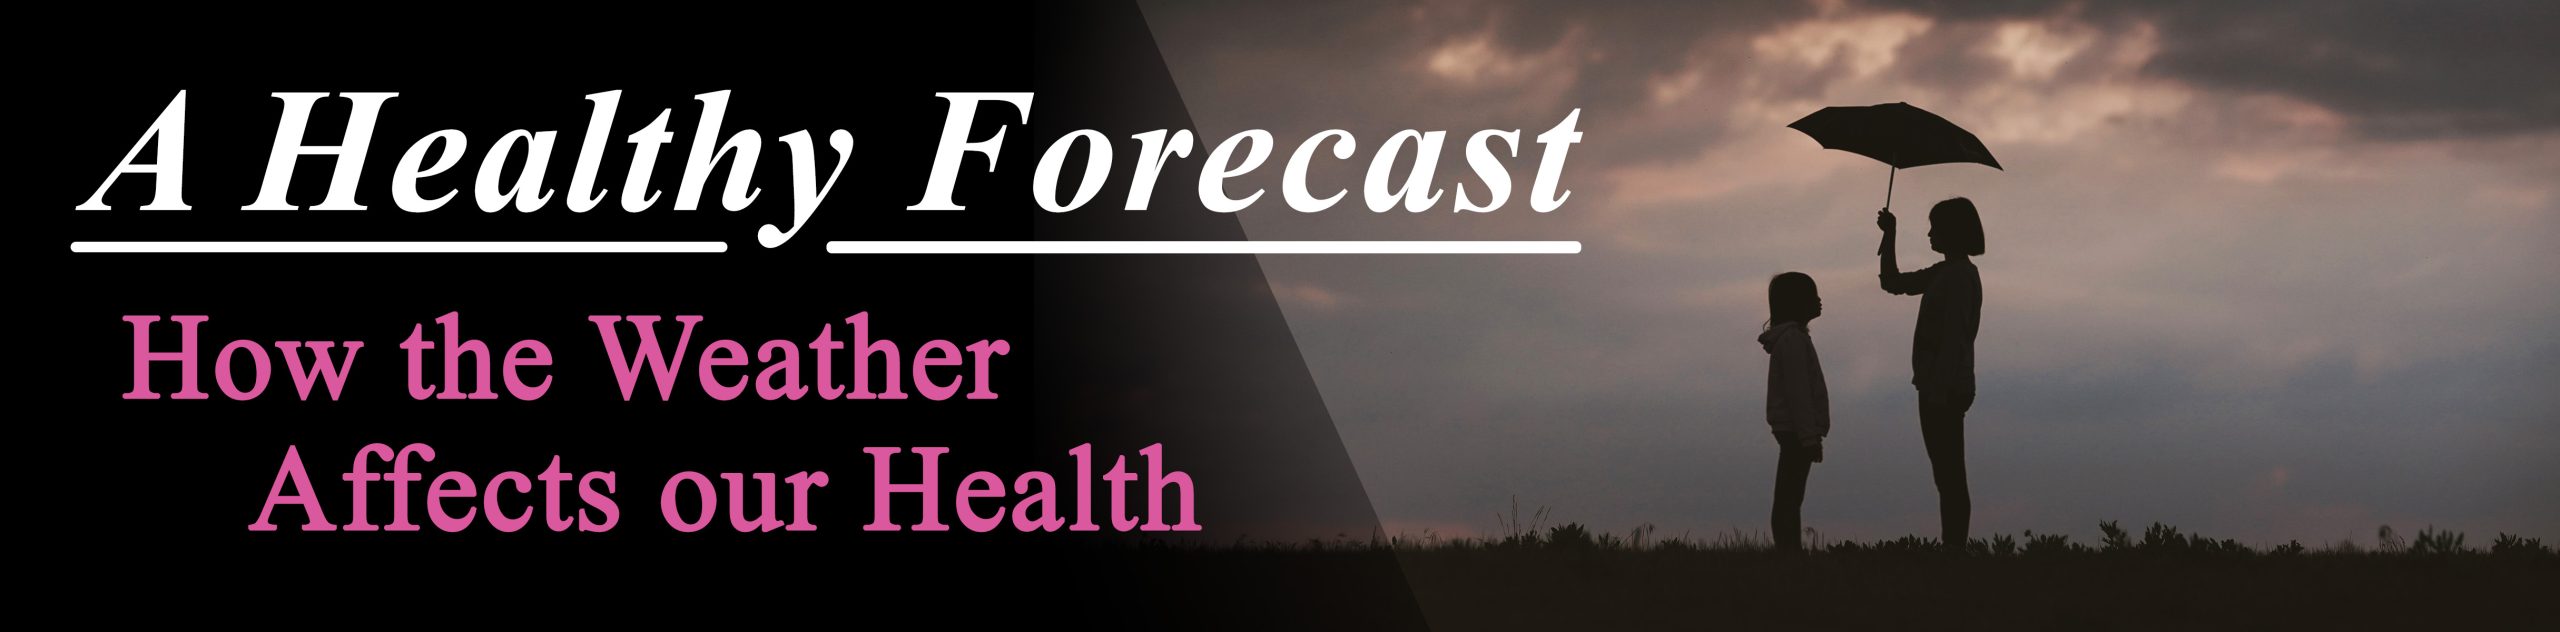 A healthy Forecast: How the Weather Affects Our Health